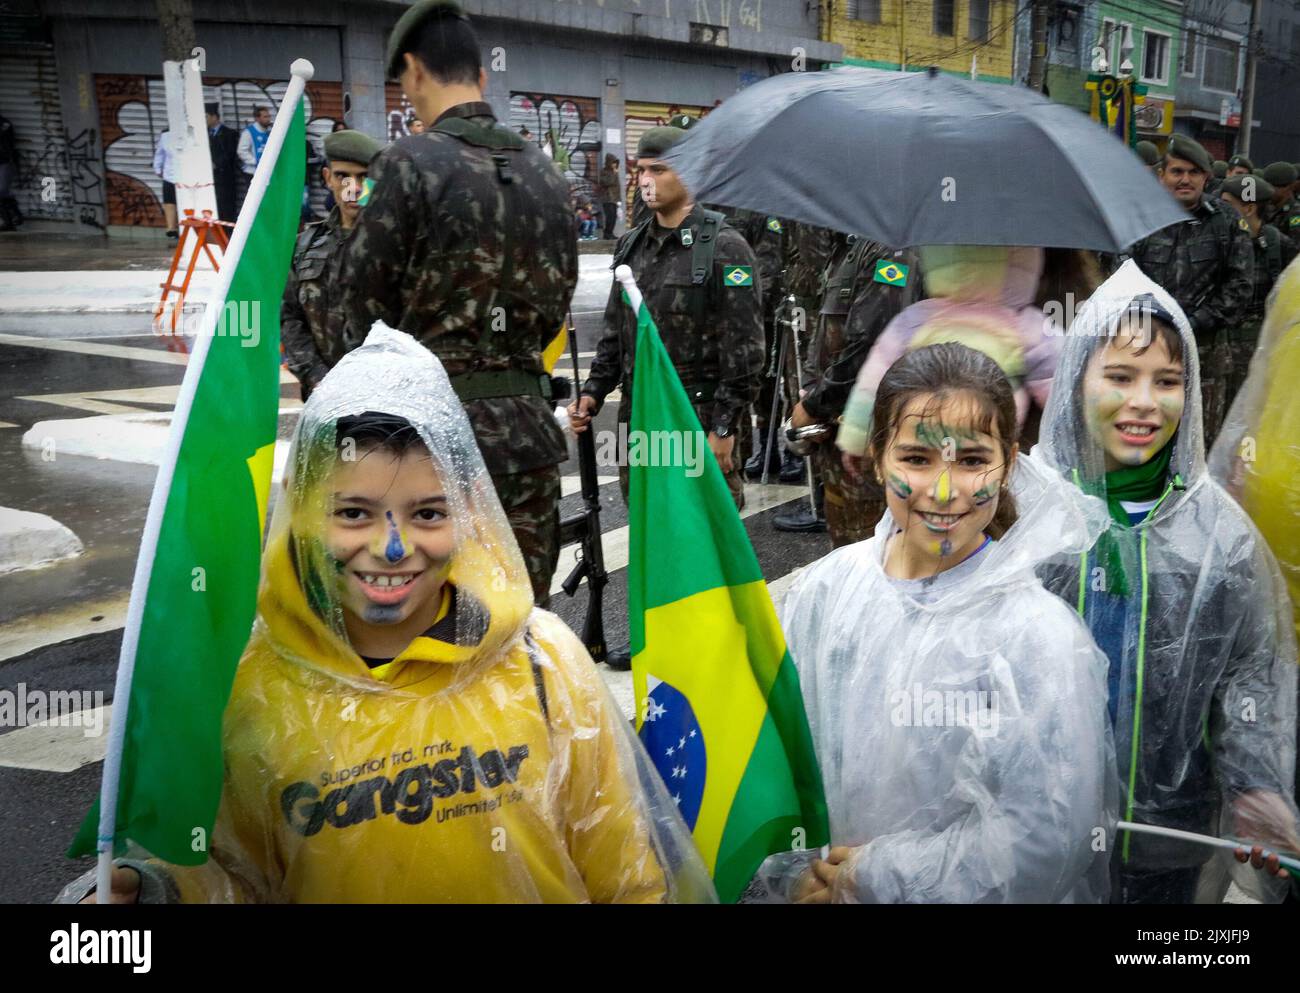 SÃO PAULO, SP - 07.09.2022: 200 ANOS DA INDEPENDÊNCIA DO BRASIL - Thousands of people attend the civic parade on this rainy Wednesday (7), which, due to the celebrations of the 200th anniversary of the Independence of Brazil, is taking place in the Ipiranga neighborhood in the south of São Paulo. Part of the people carried the national flag, shirts of the Brazilian team and shirts in defense of President Jair Bolsonaro. (Photo: Aloisio Mauricio/Fotoarena) Stock Photo